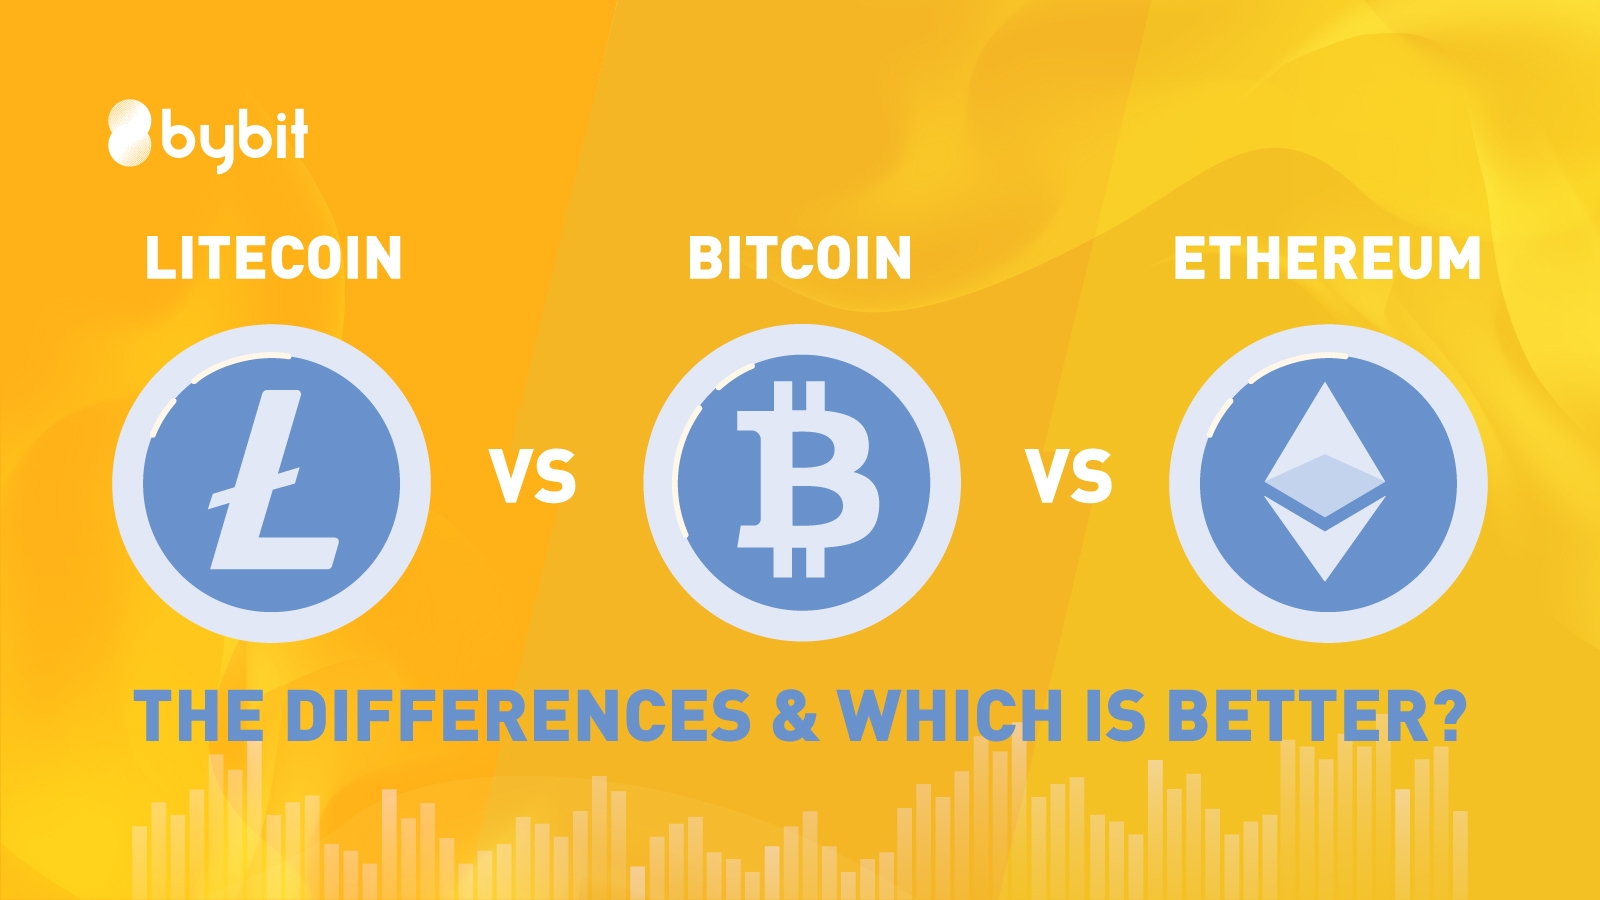 Bitcoin vs Ethereum: A comparison between the hottest cryptocurrencies today